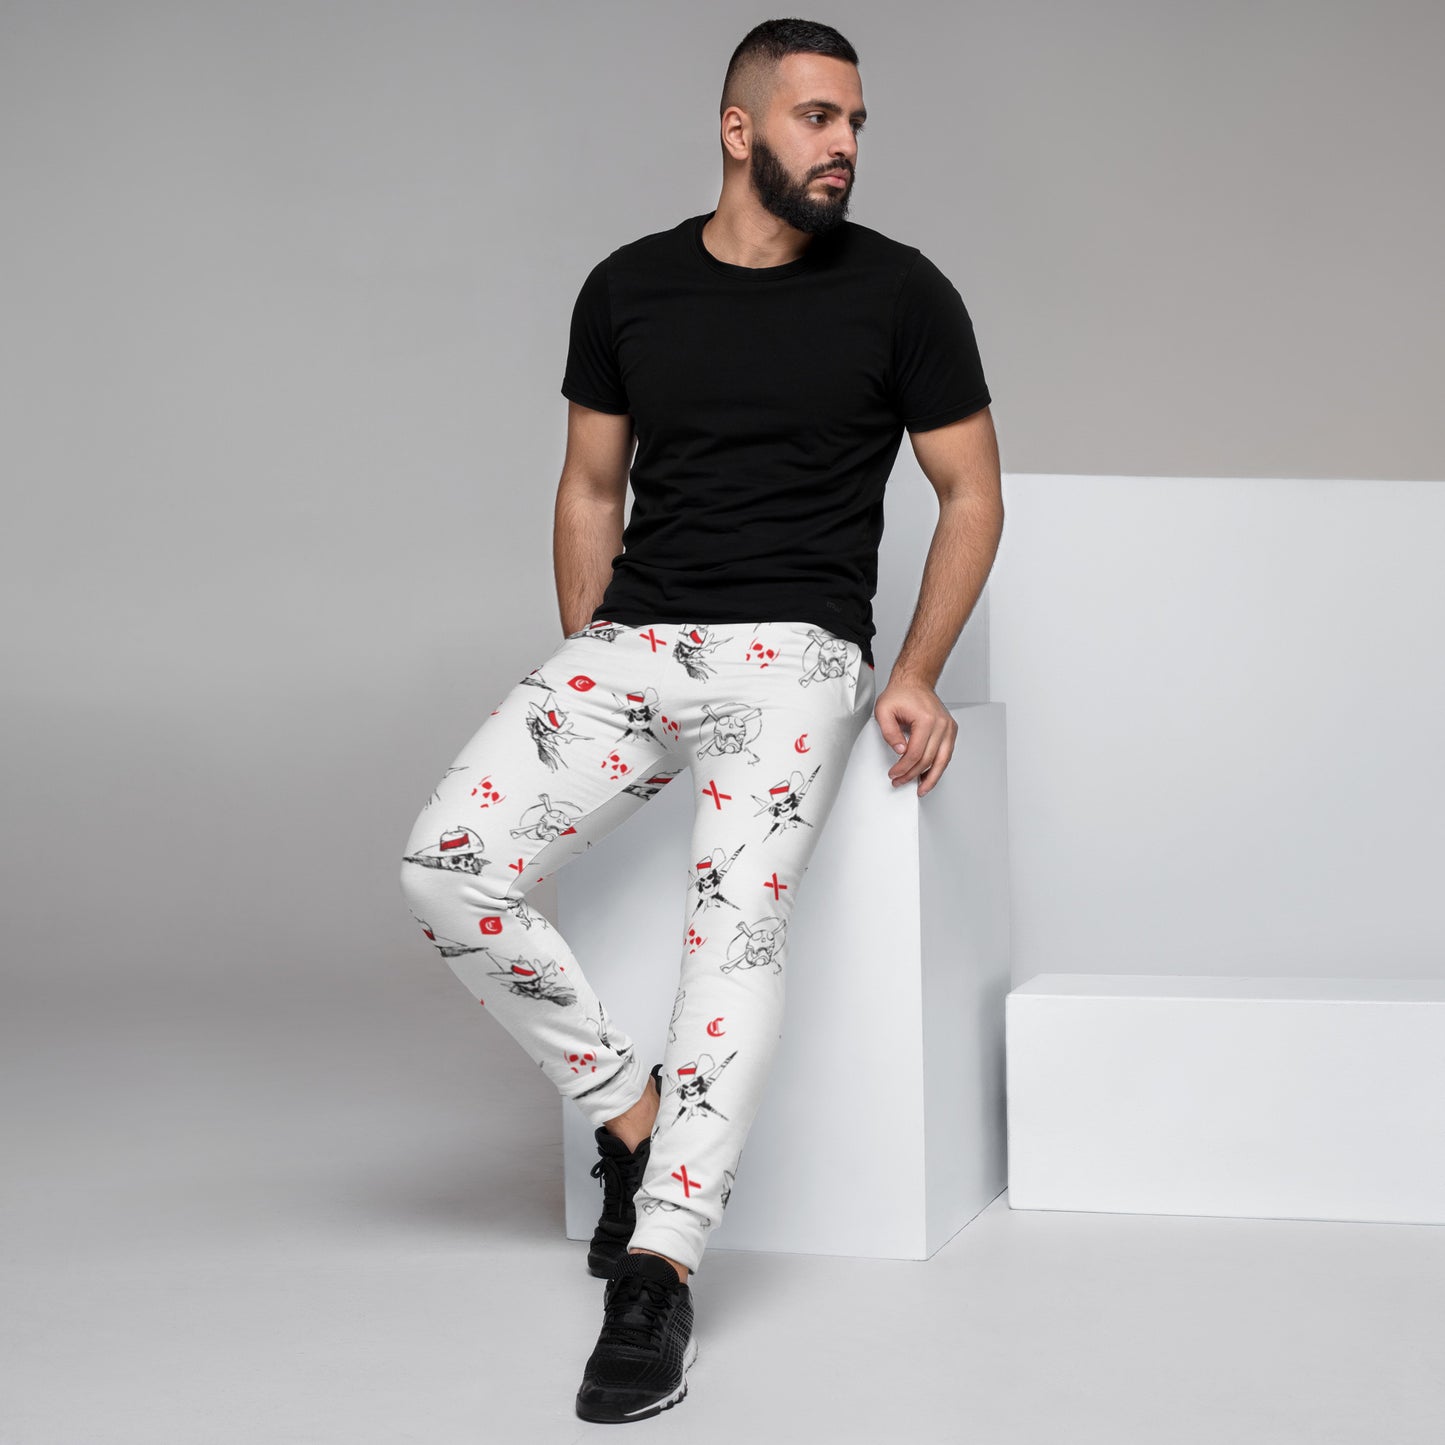 The gaudy joggers - men's